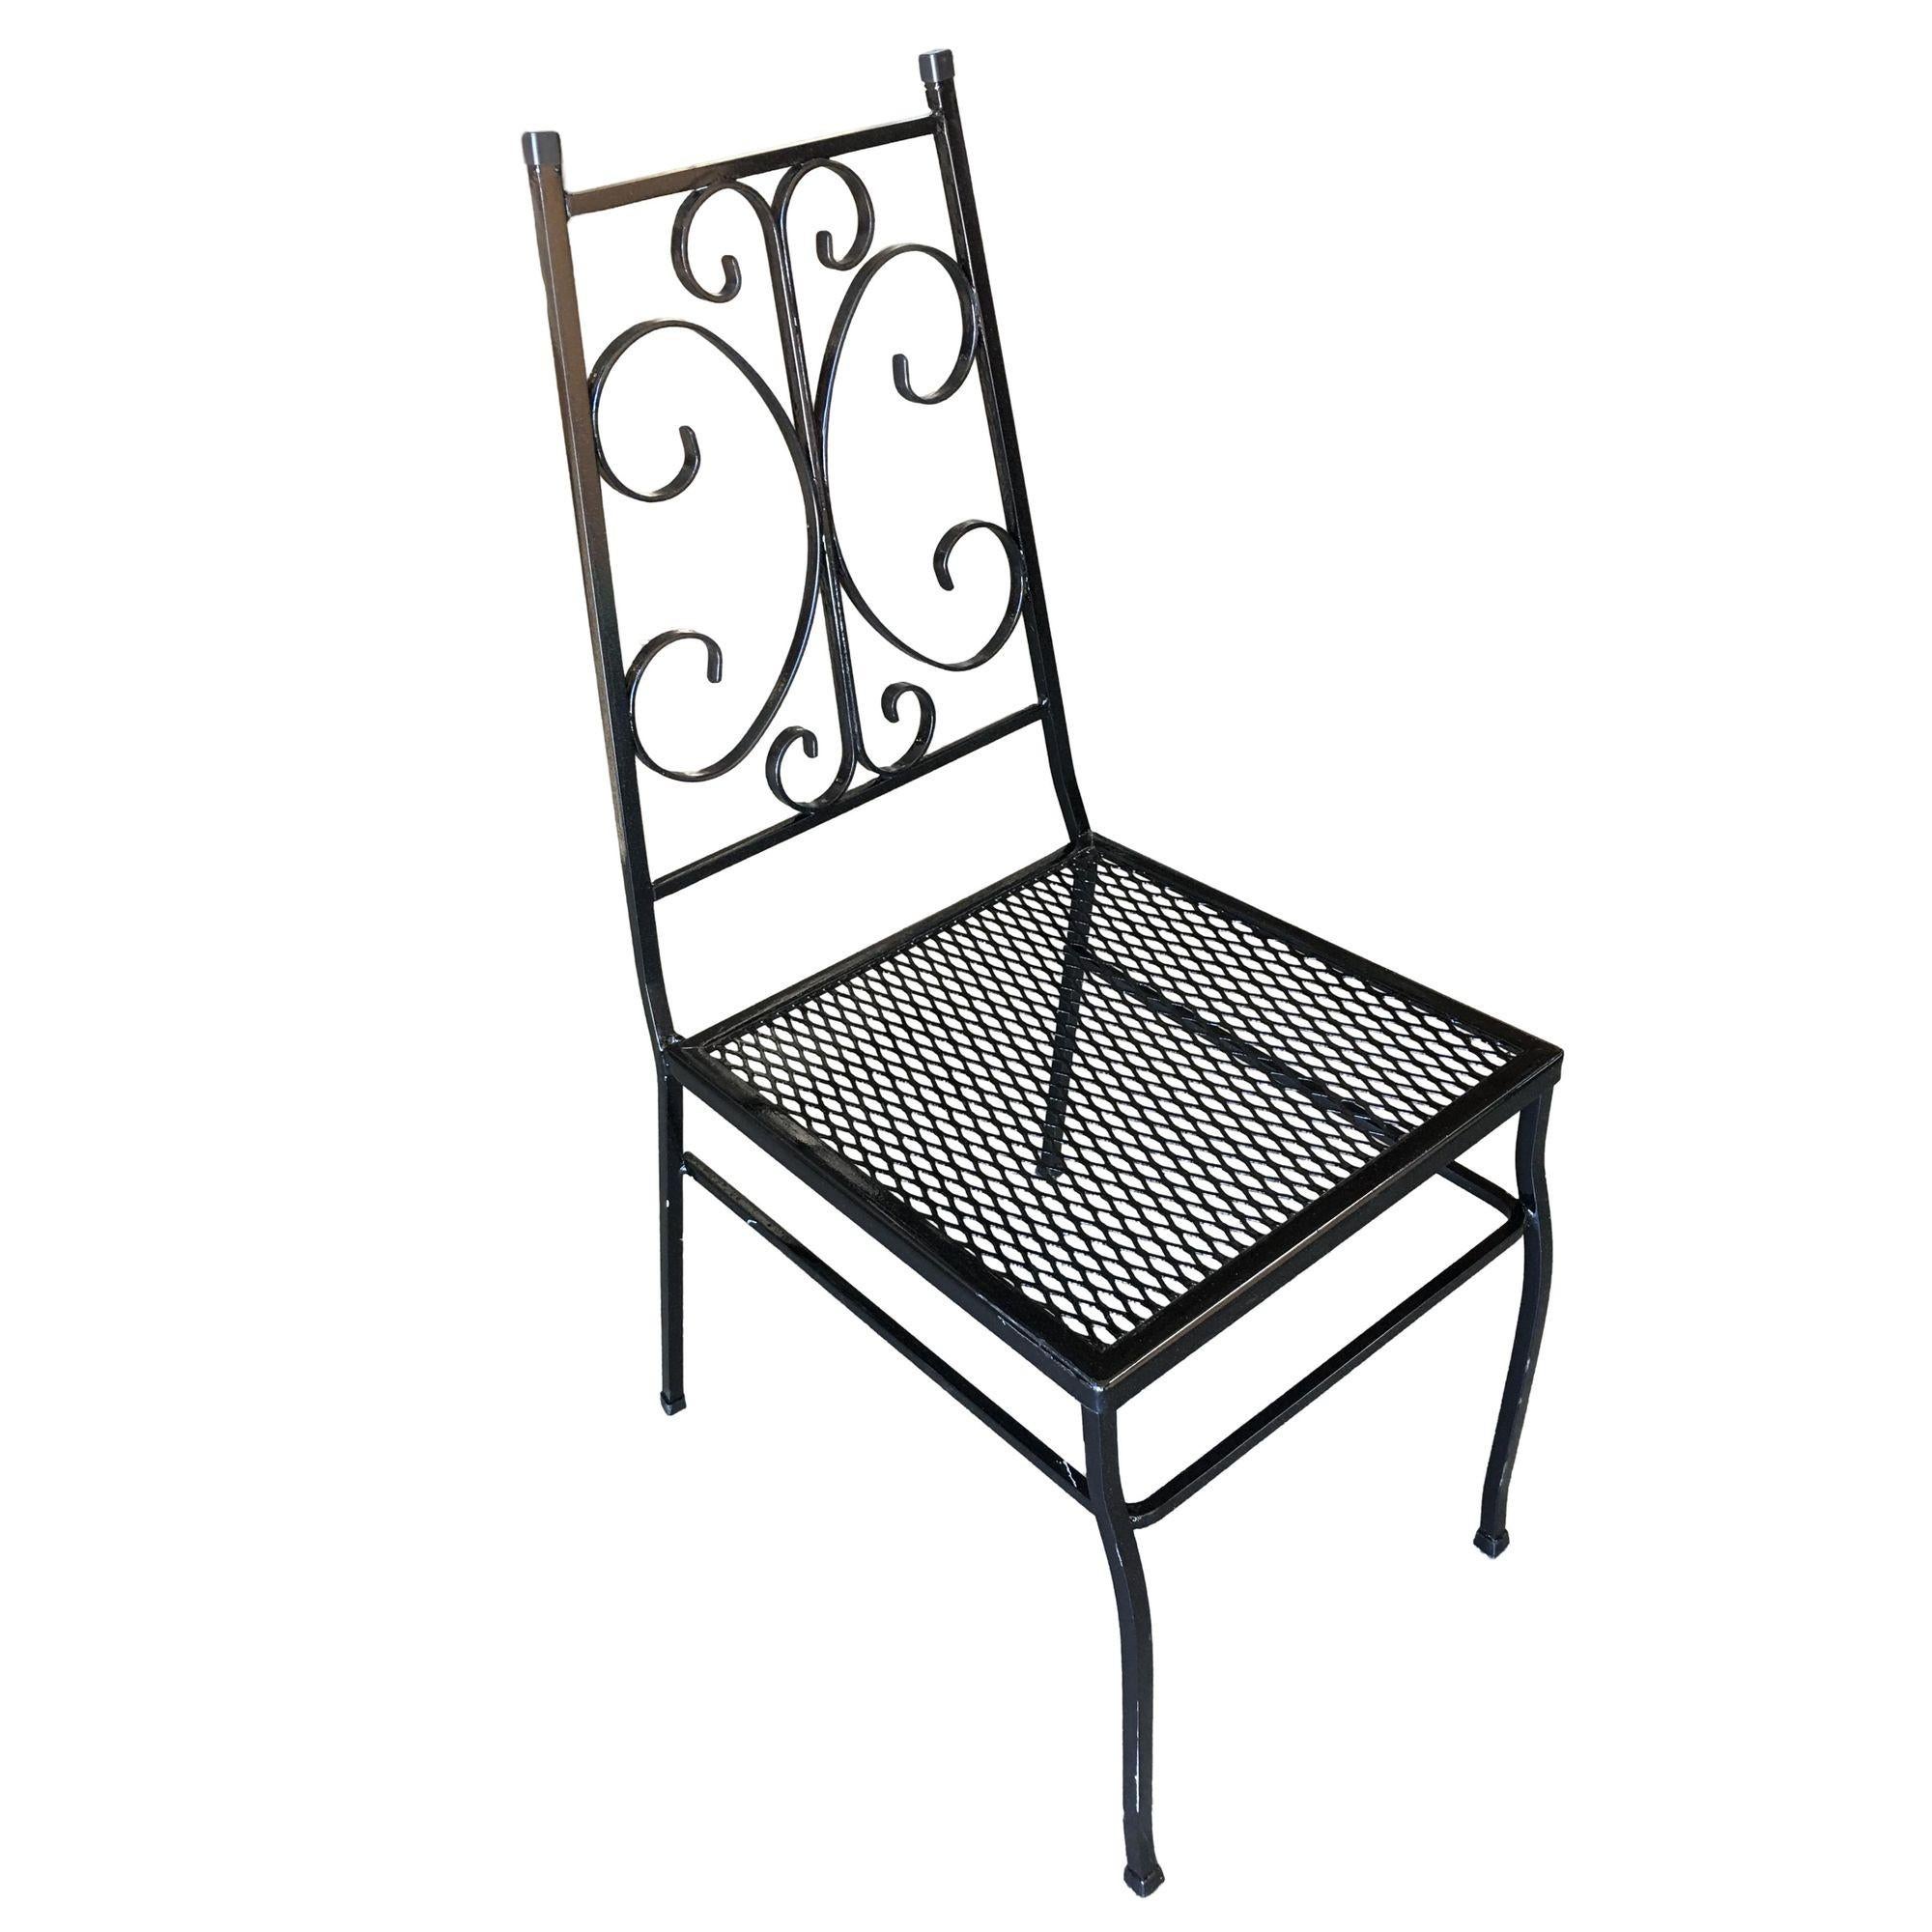 Set of four outdoor patio chairs with scrolling pattern and mesh steel seats.